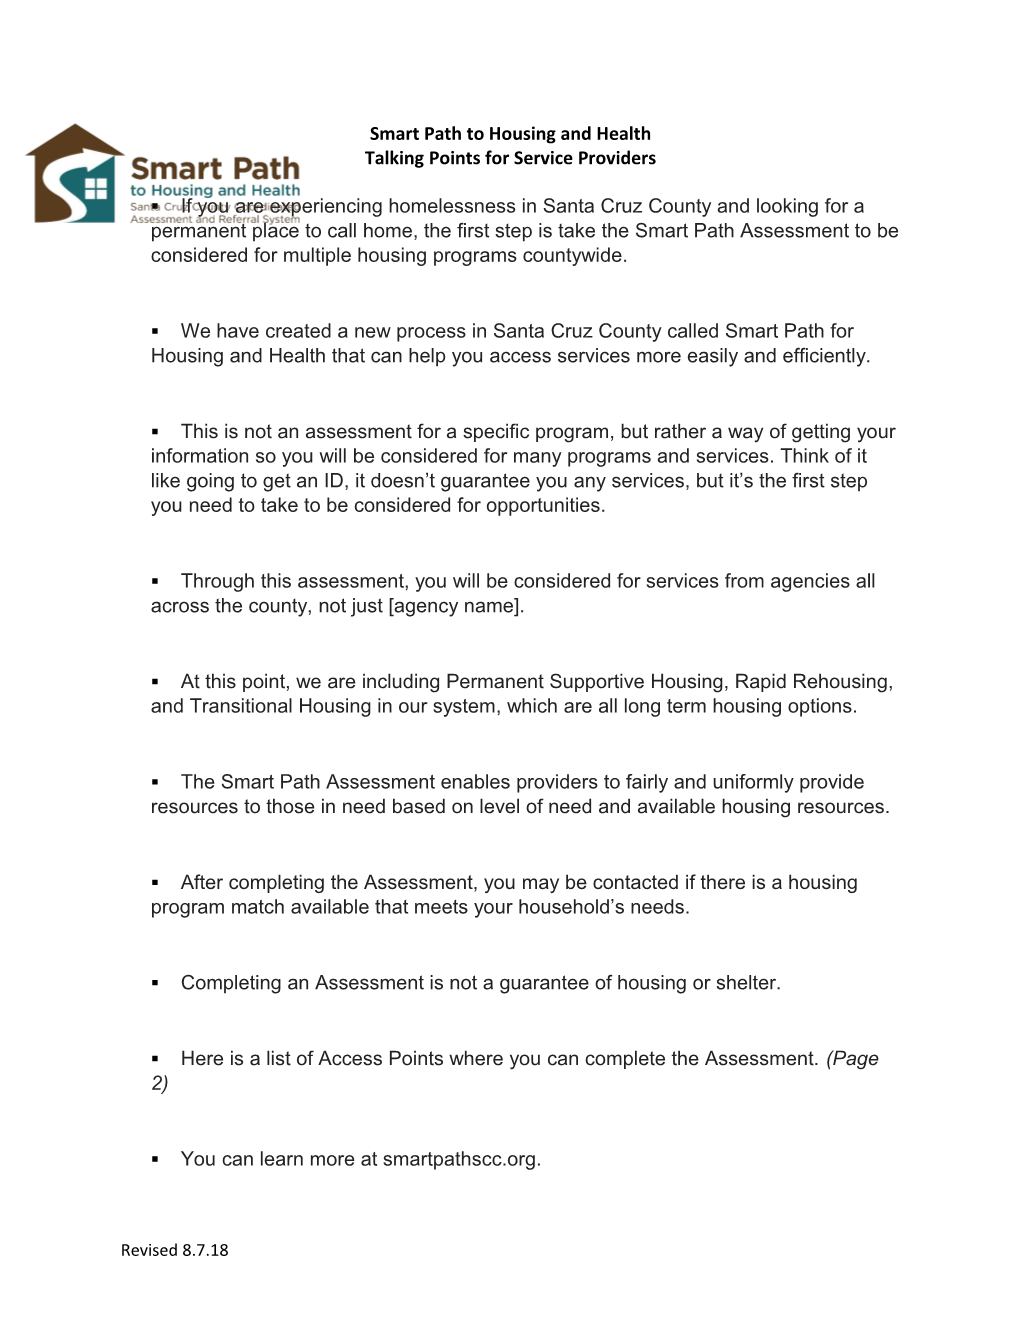 Smart Path to Housing and Health Talking Points for Service Providers